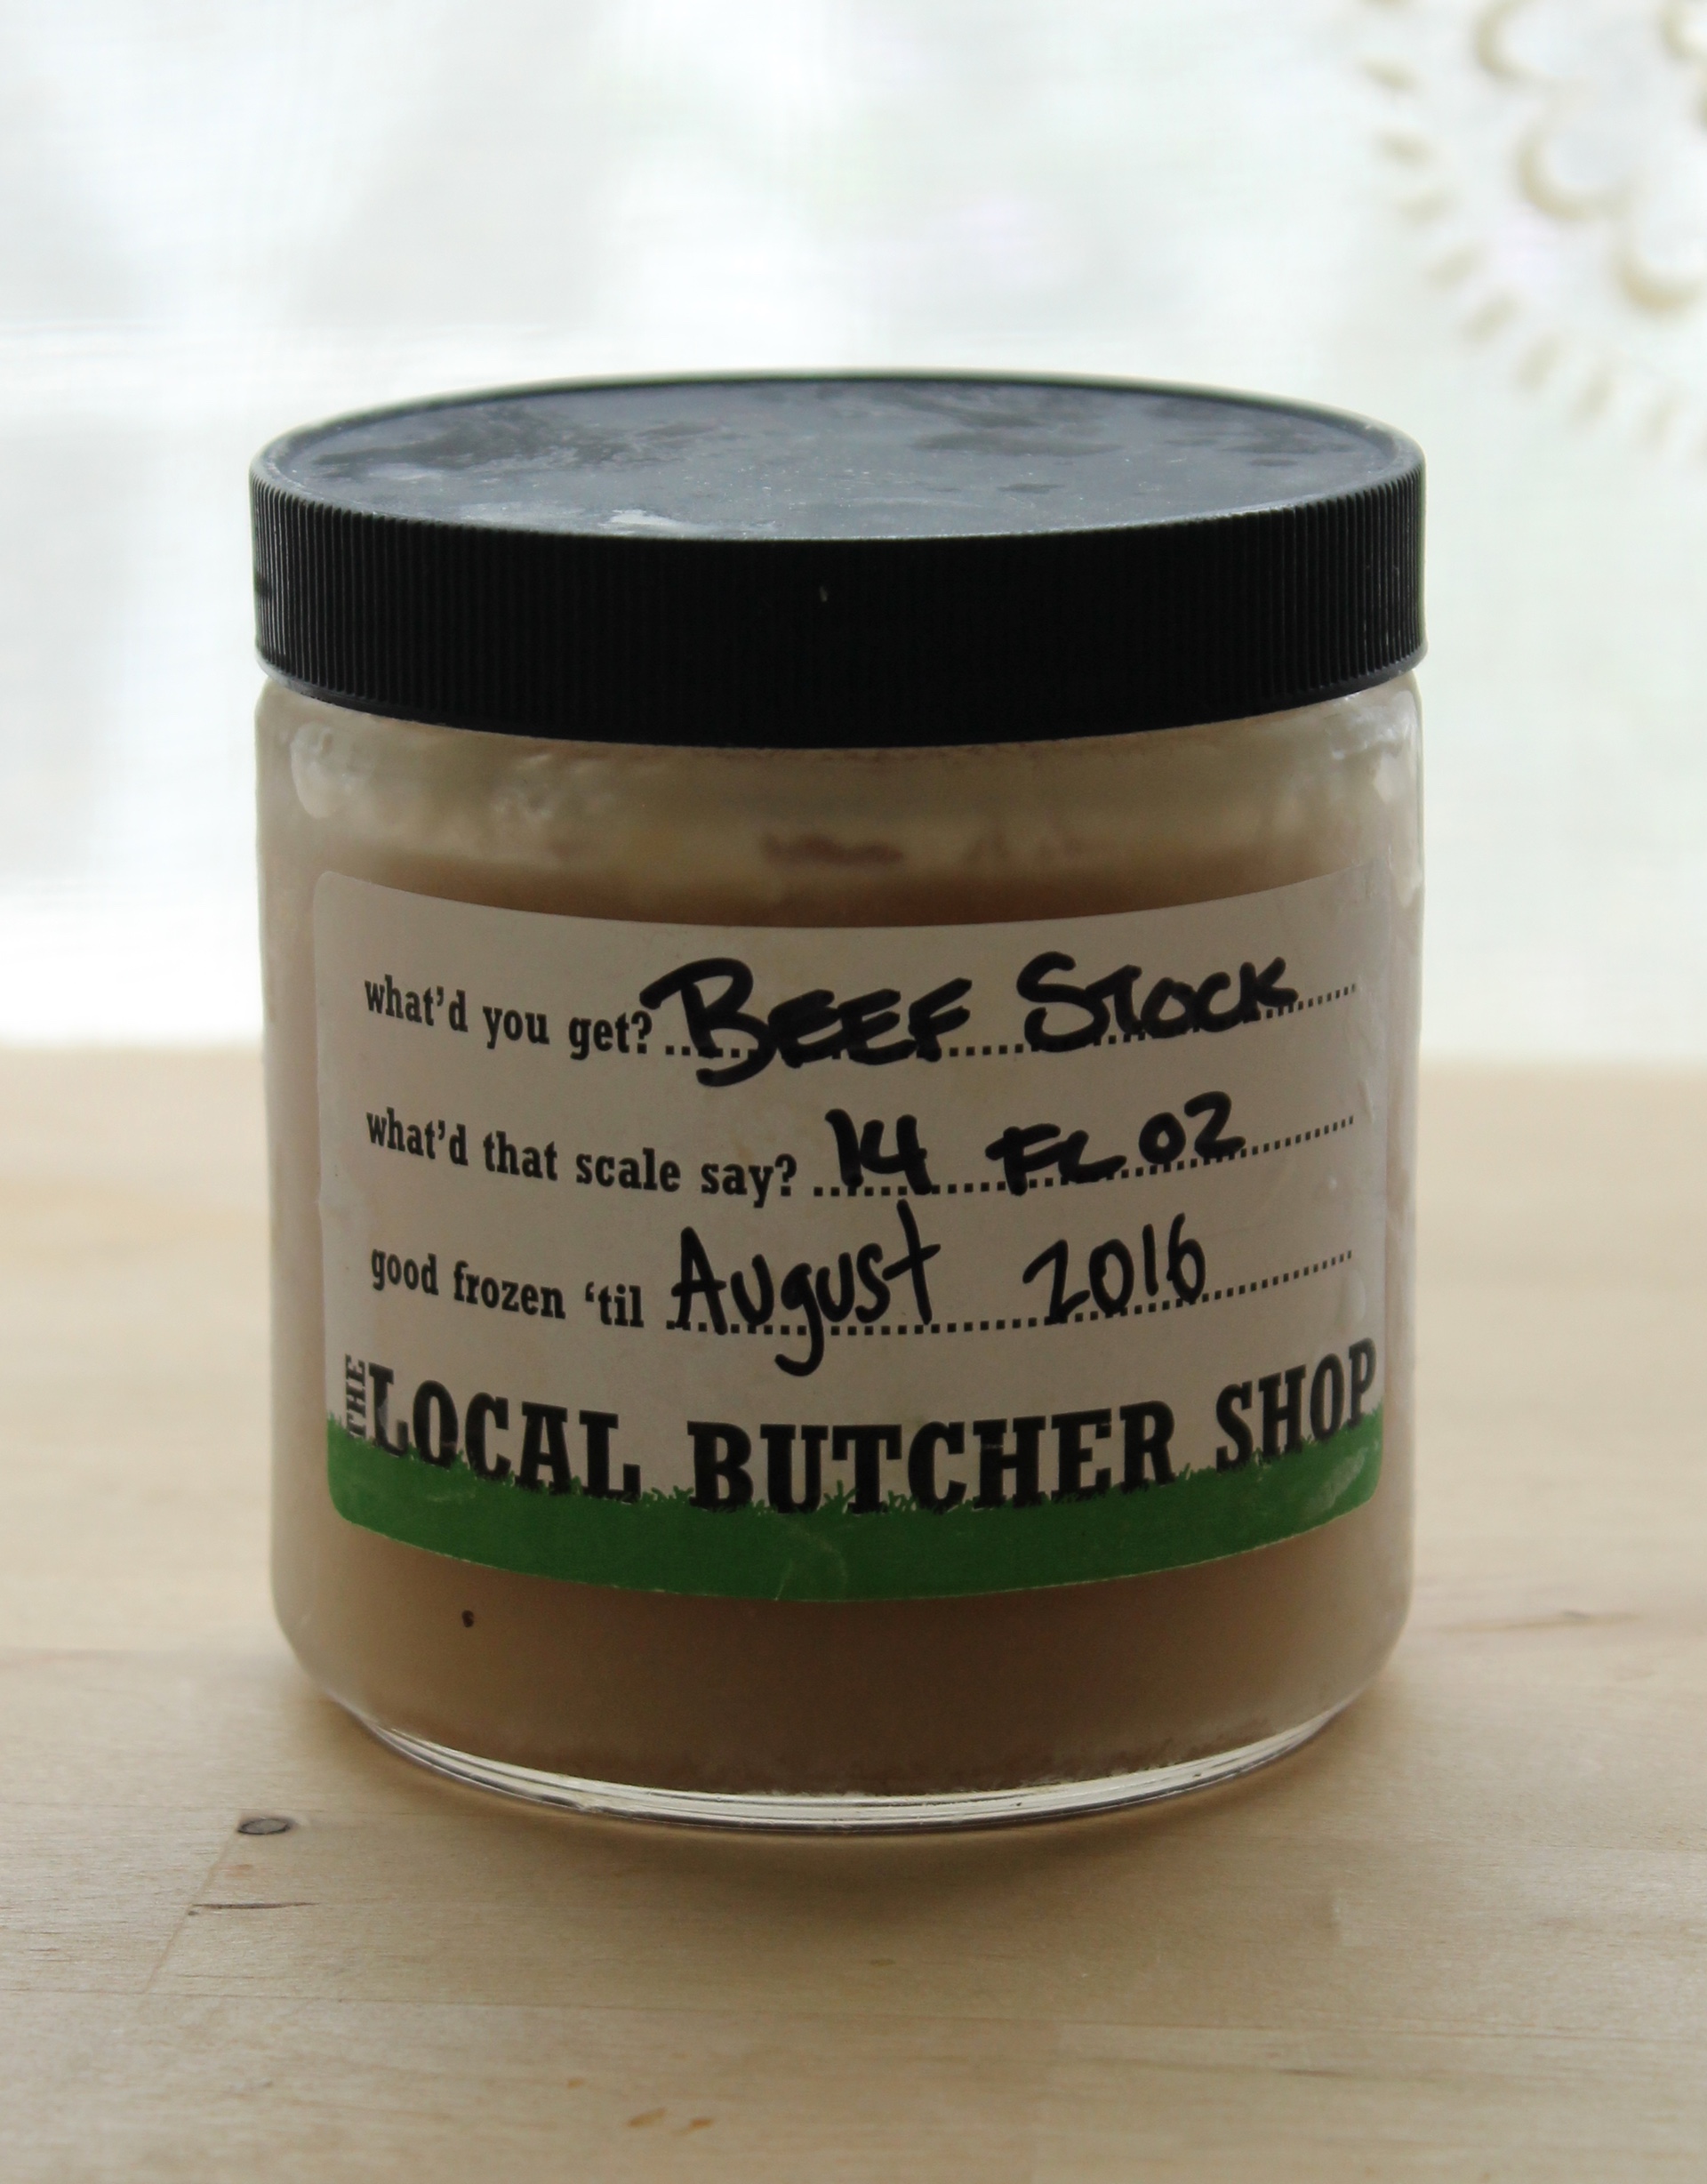 The Local Butcher Shop Beef Stock.